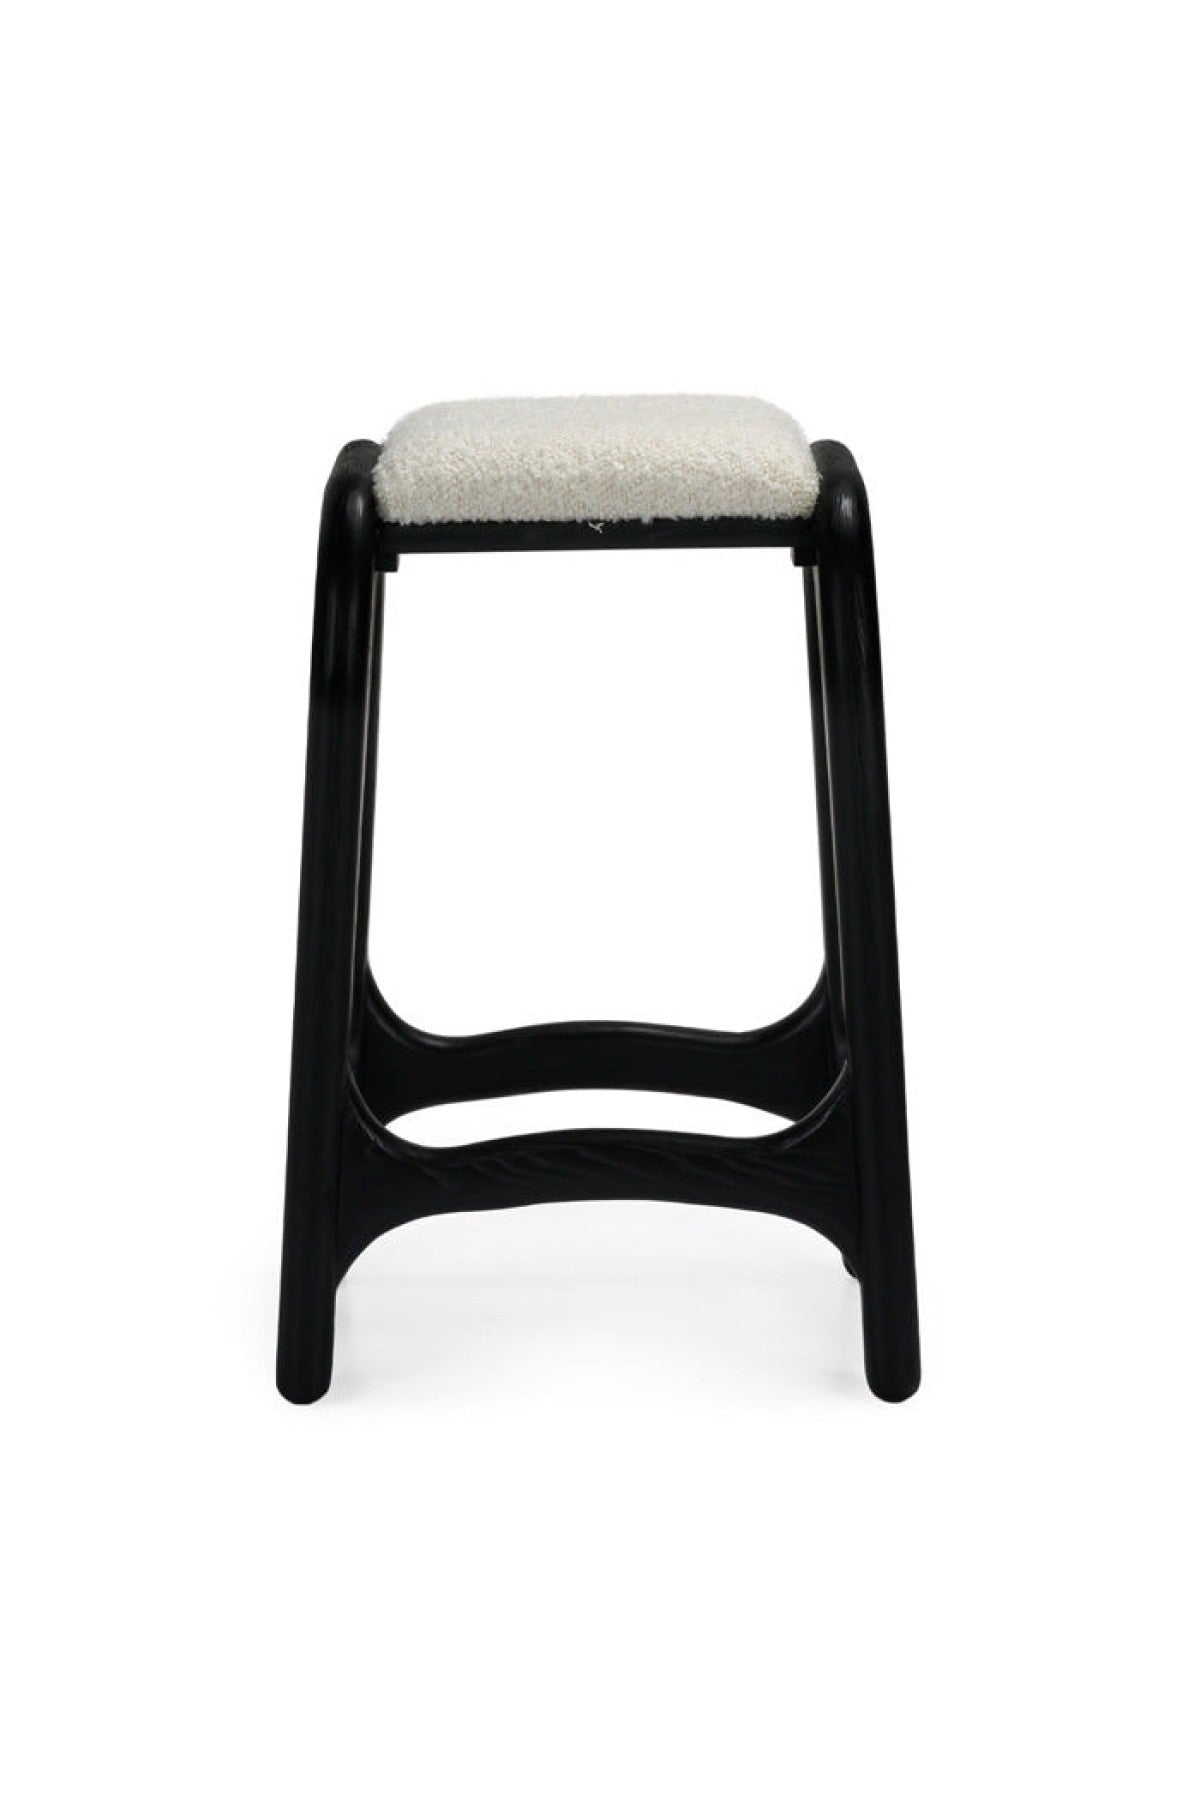 Nest Counter Stool - Charcoal